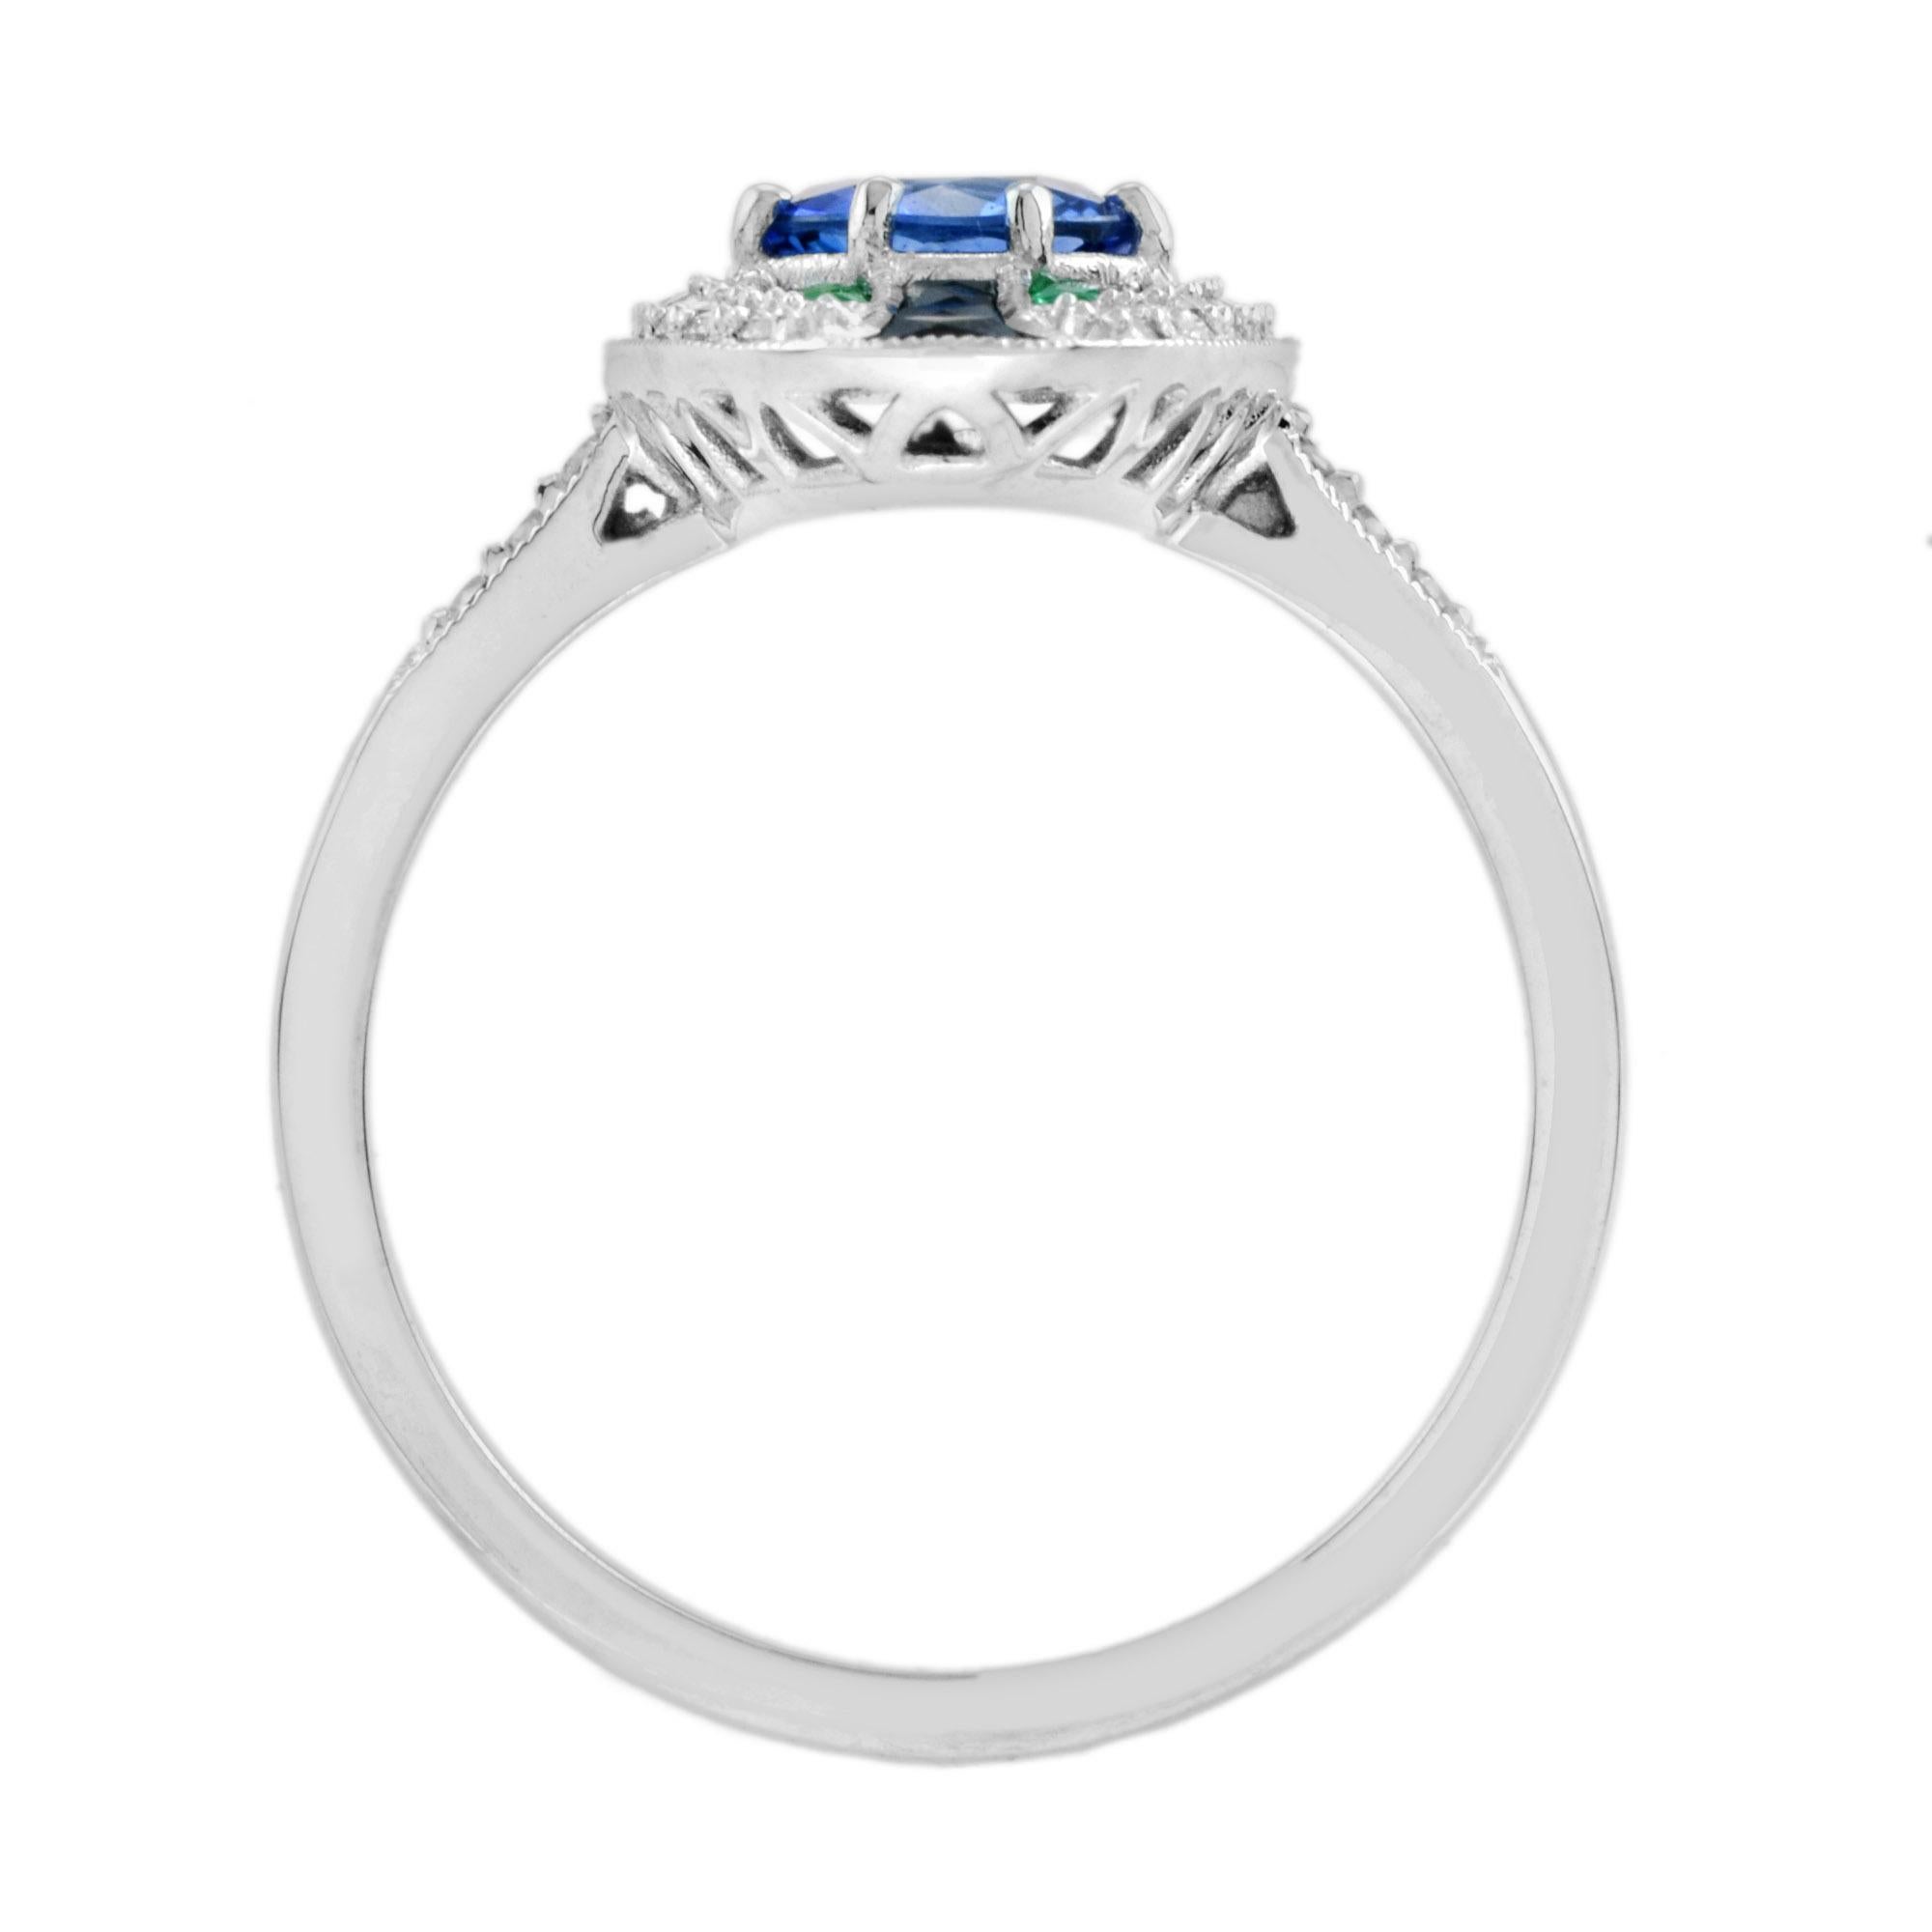 Ceylon Sapphire with Emerald Onyx Diamond Art Deco Style Ring in 18k White Gold For Sale 3